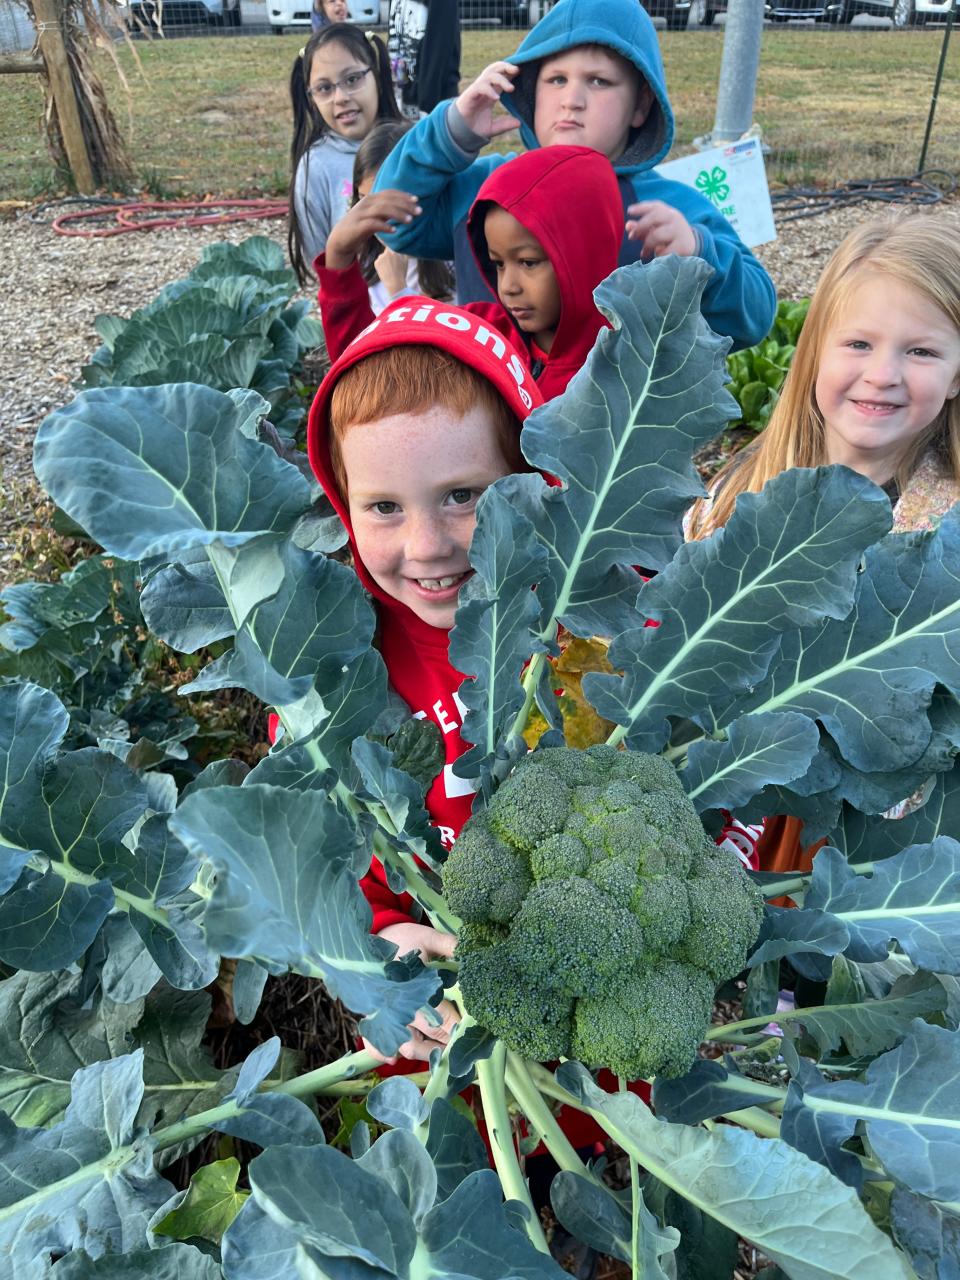 Hot Springs Elementary School first grade students harvested broccoli and cabbage earlier this fall. According to Garden Coordinator Natlie Hesed, the group talked about how produce can be purchased by weight at a grocery store, what equipment measures weight, and then used a scale to weigh the produce.